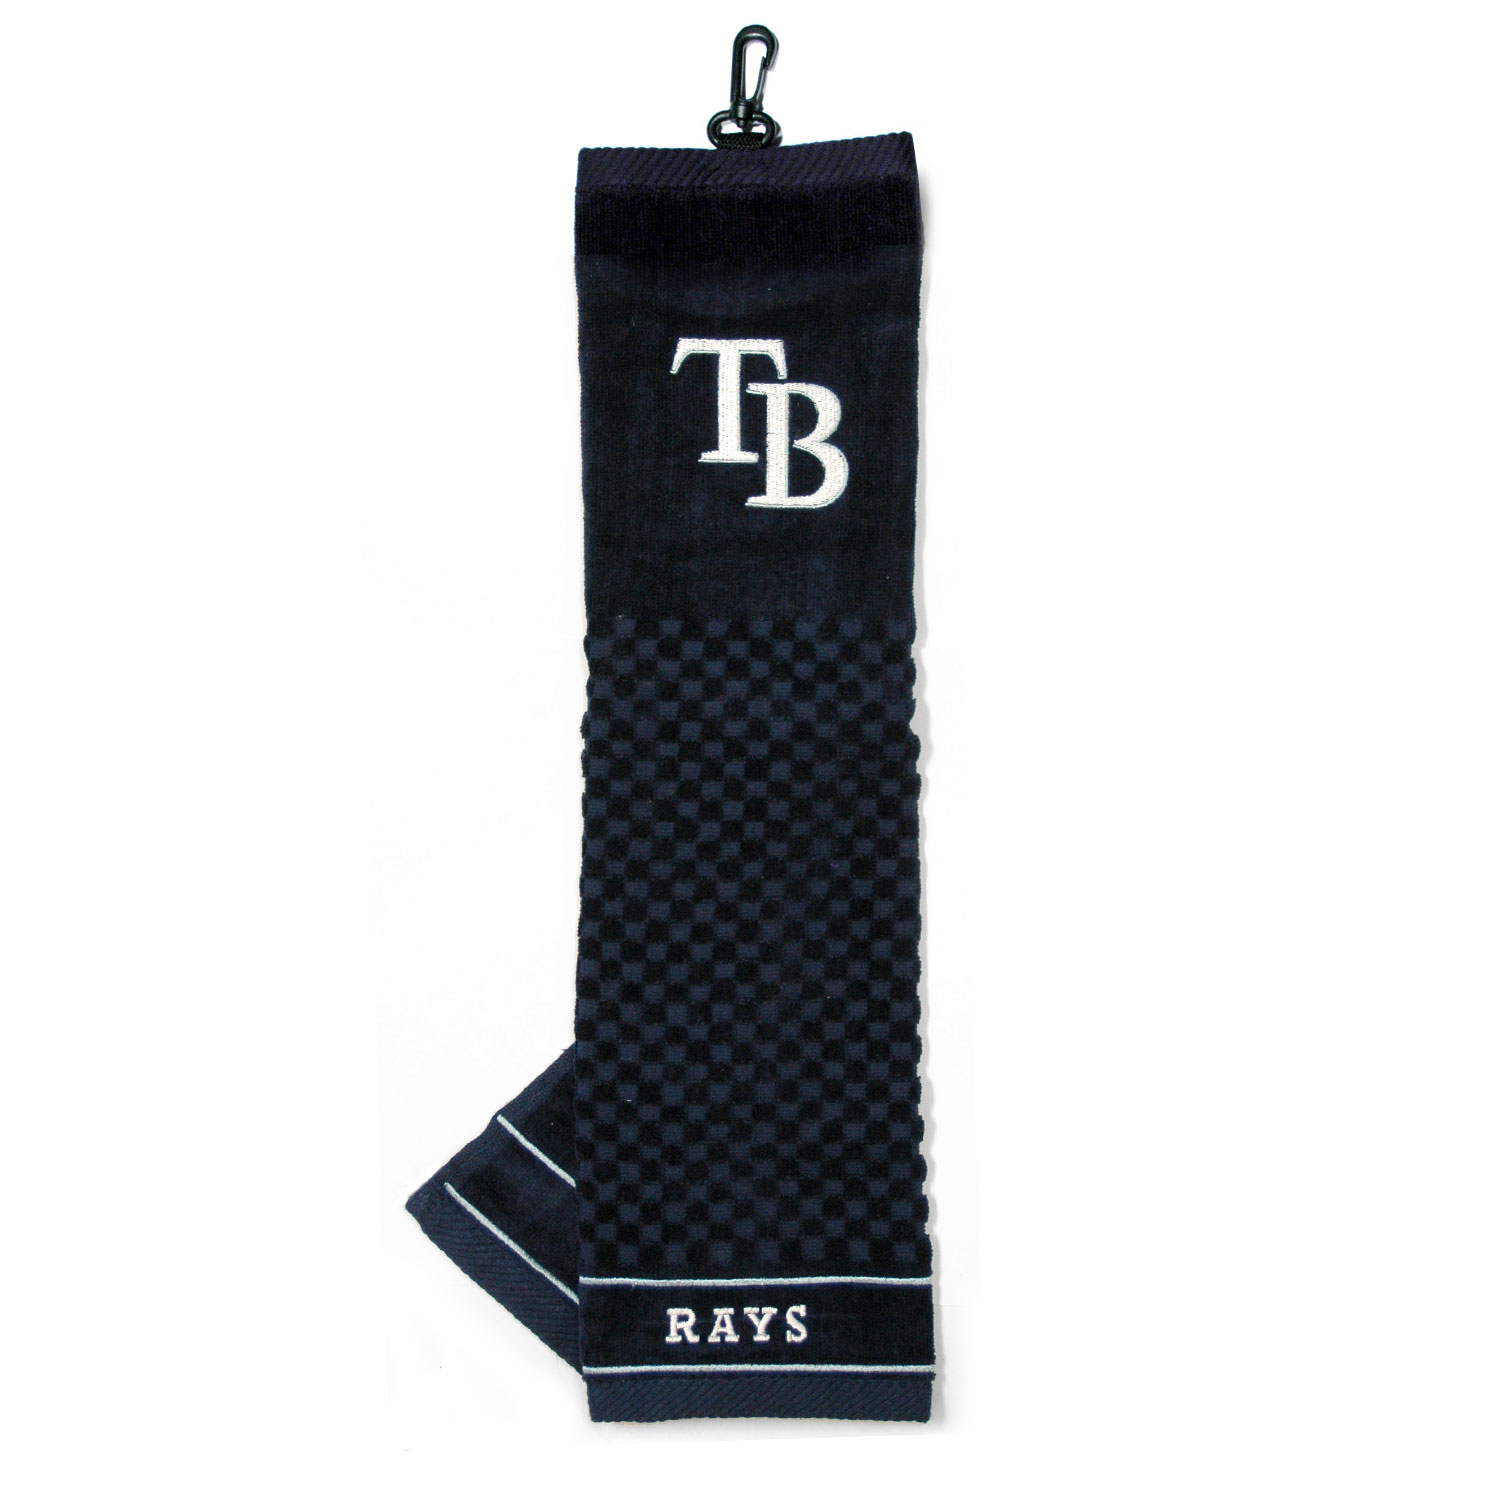 Tampa Bay Rays Embroidered Towel